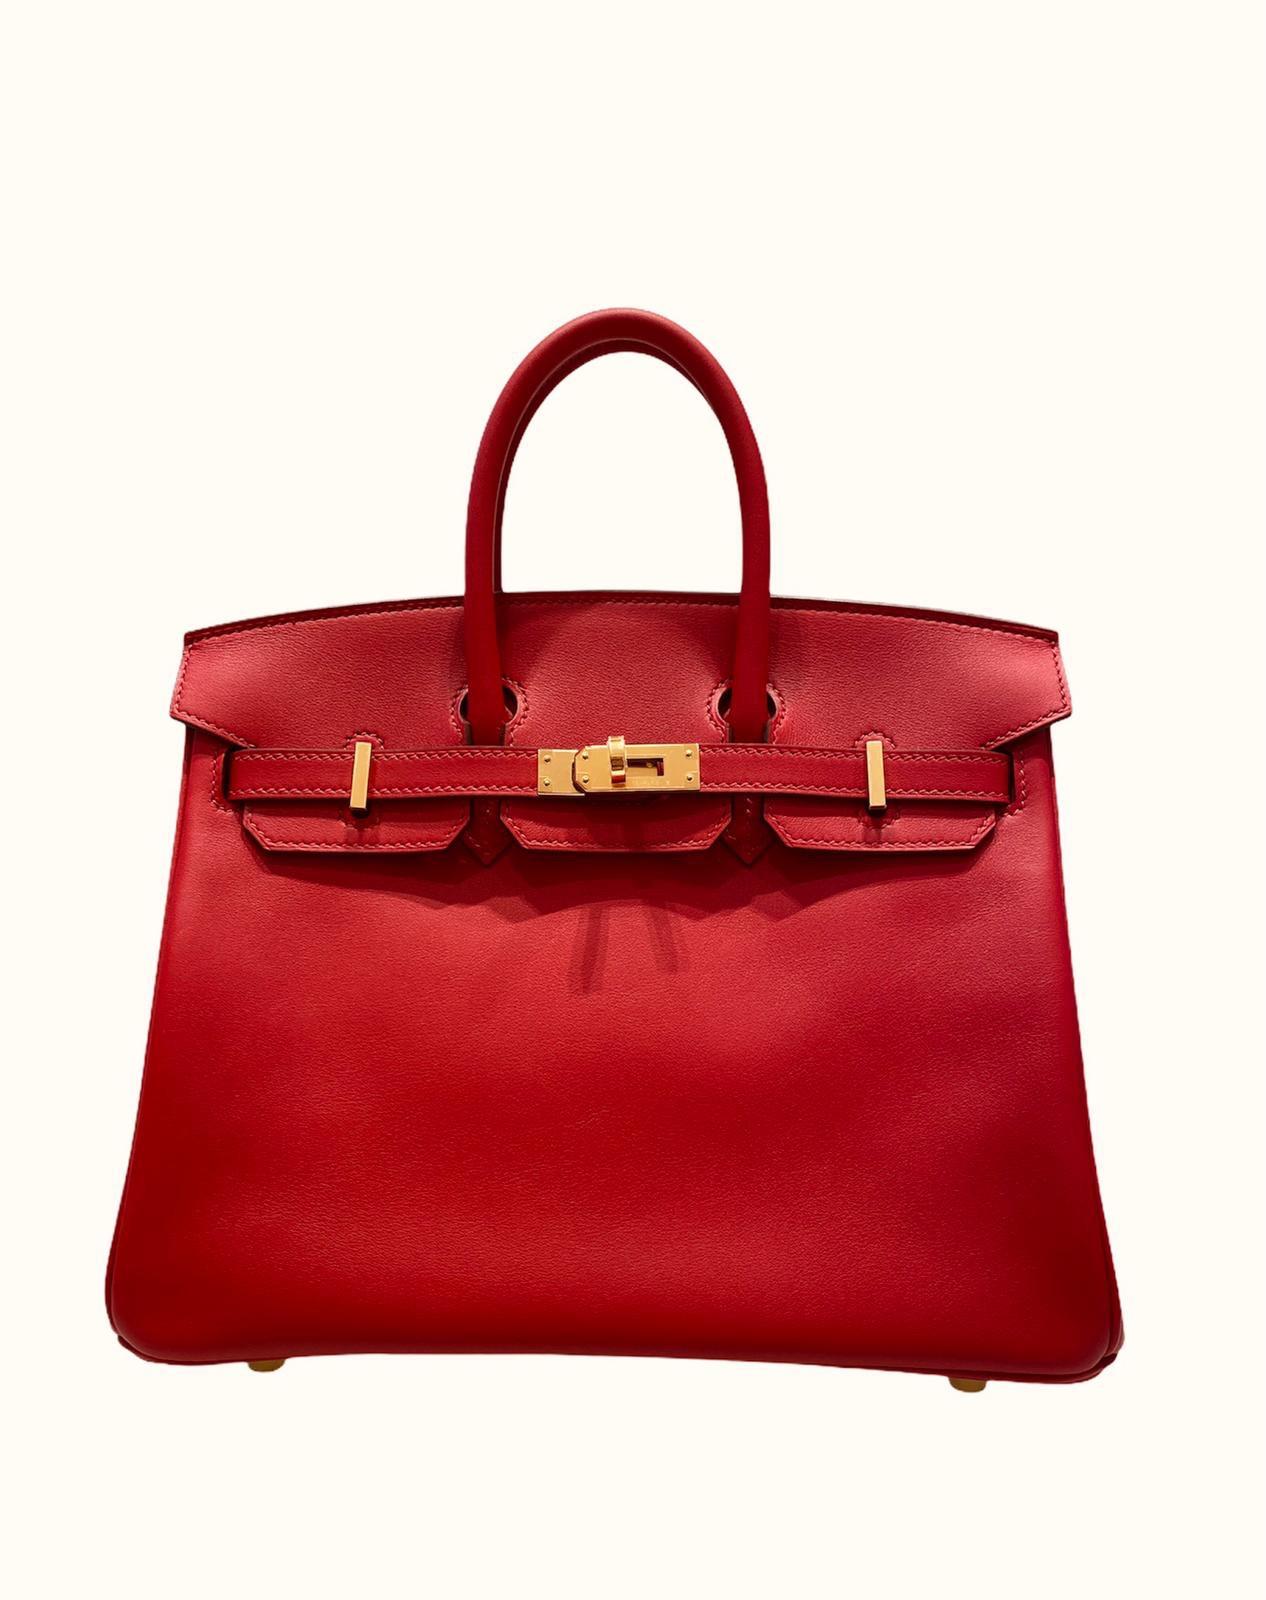 Sac Birkin 25 Rouge Piment , 2020 In New Condition For Sale In Milan, IT